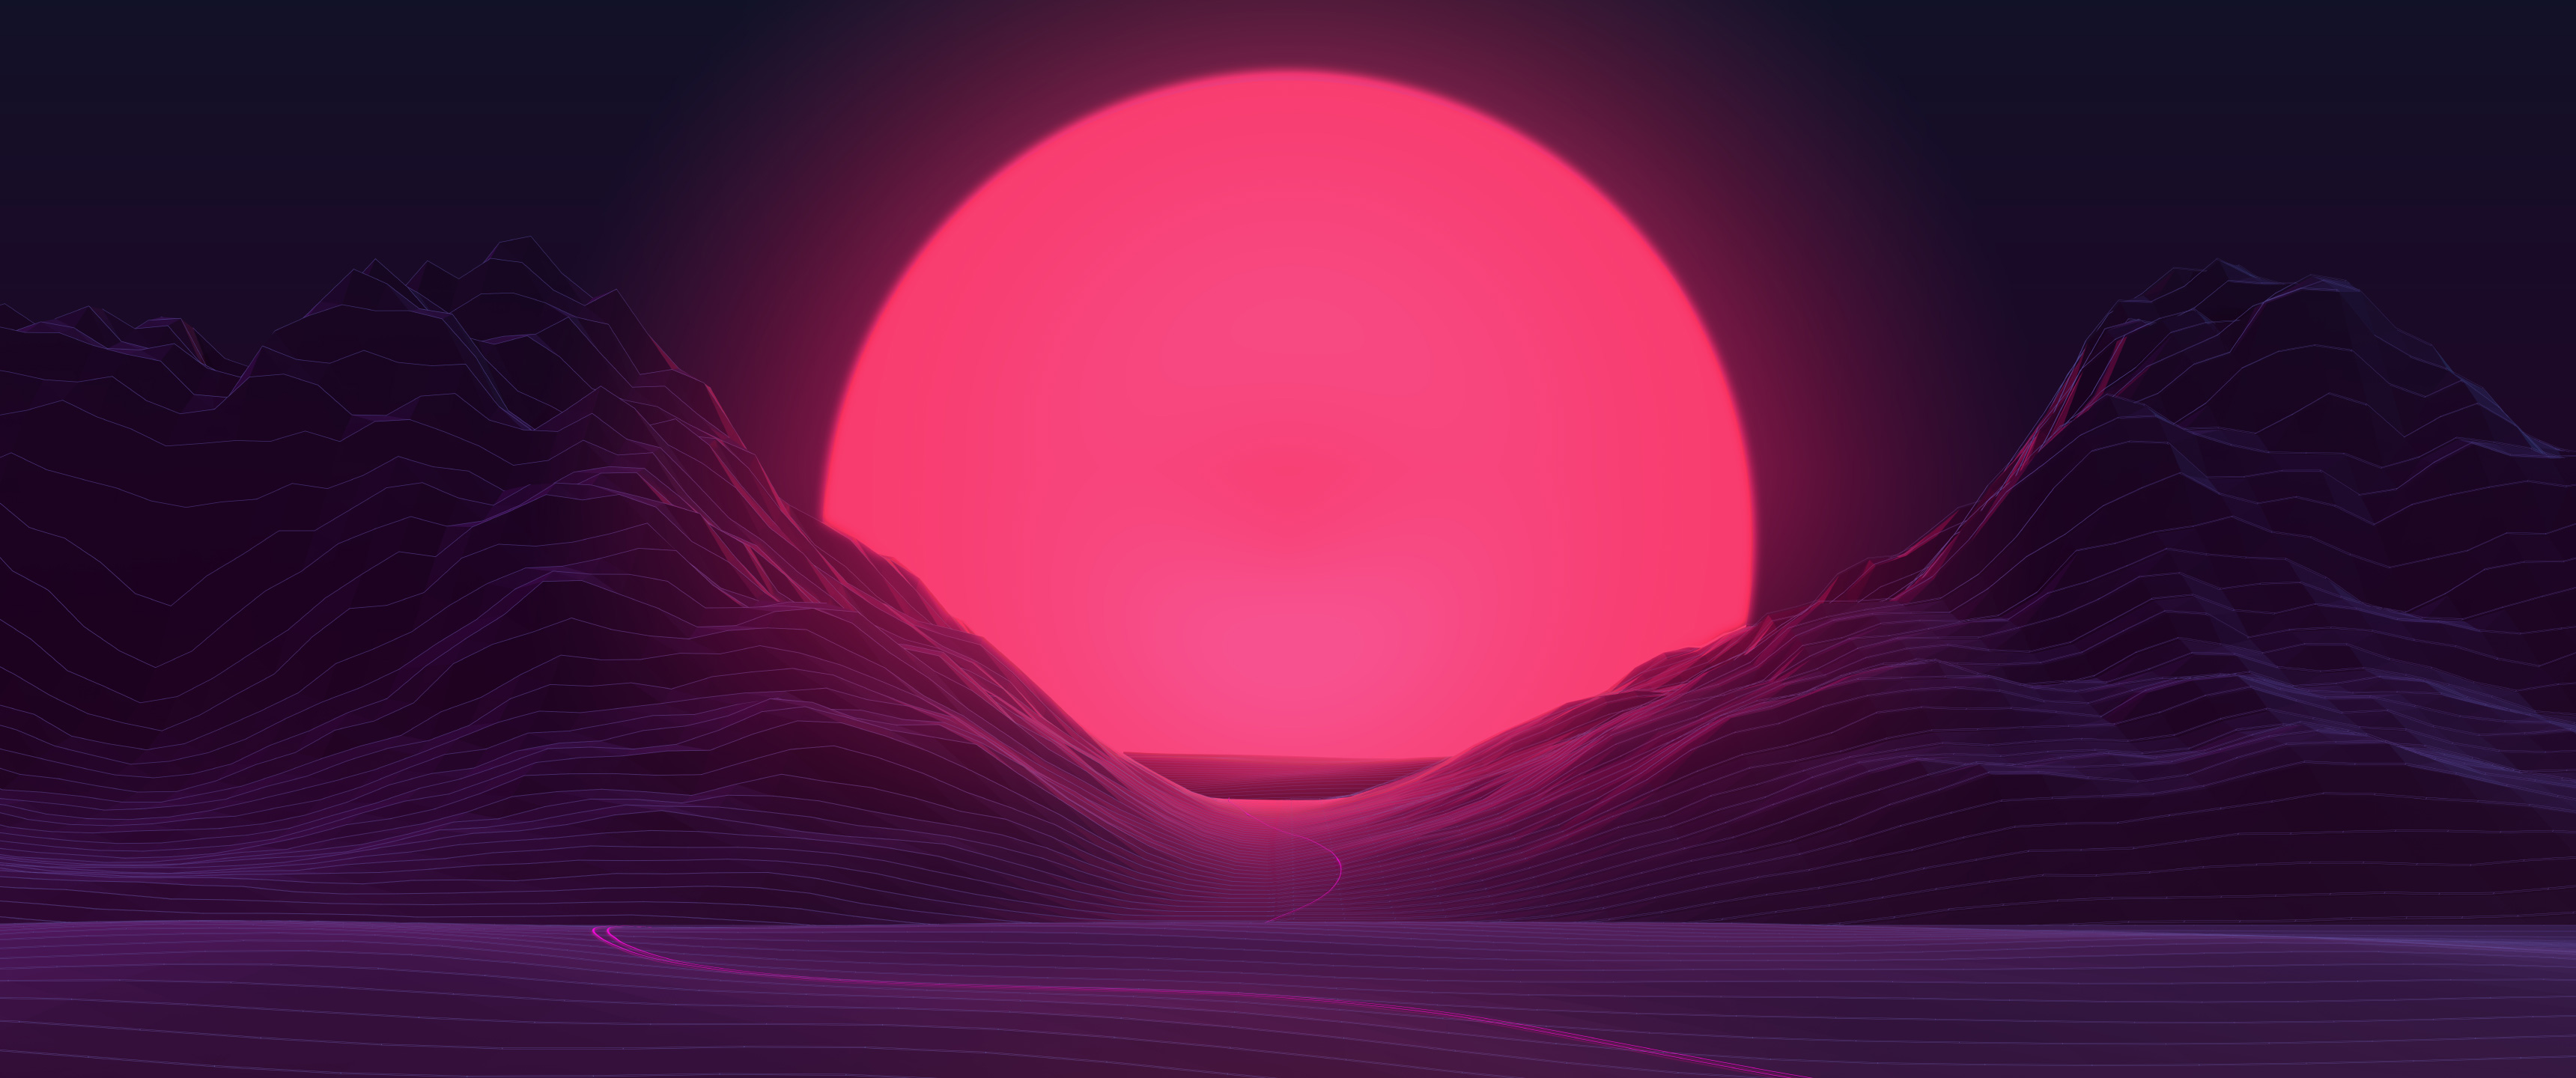 Big Sun Neon Mountains 4k, HD Artist, 4k Wallpaper, Image, Background, Photo and Picture